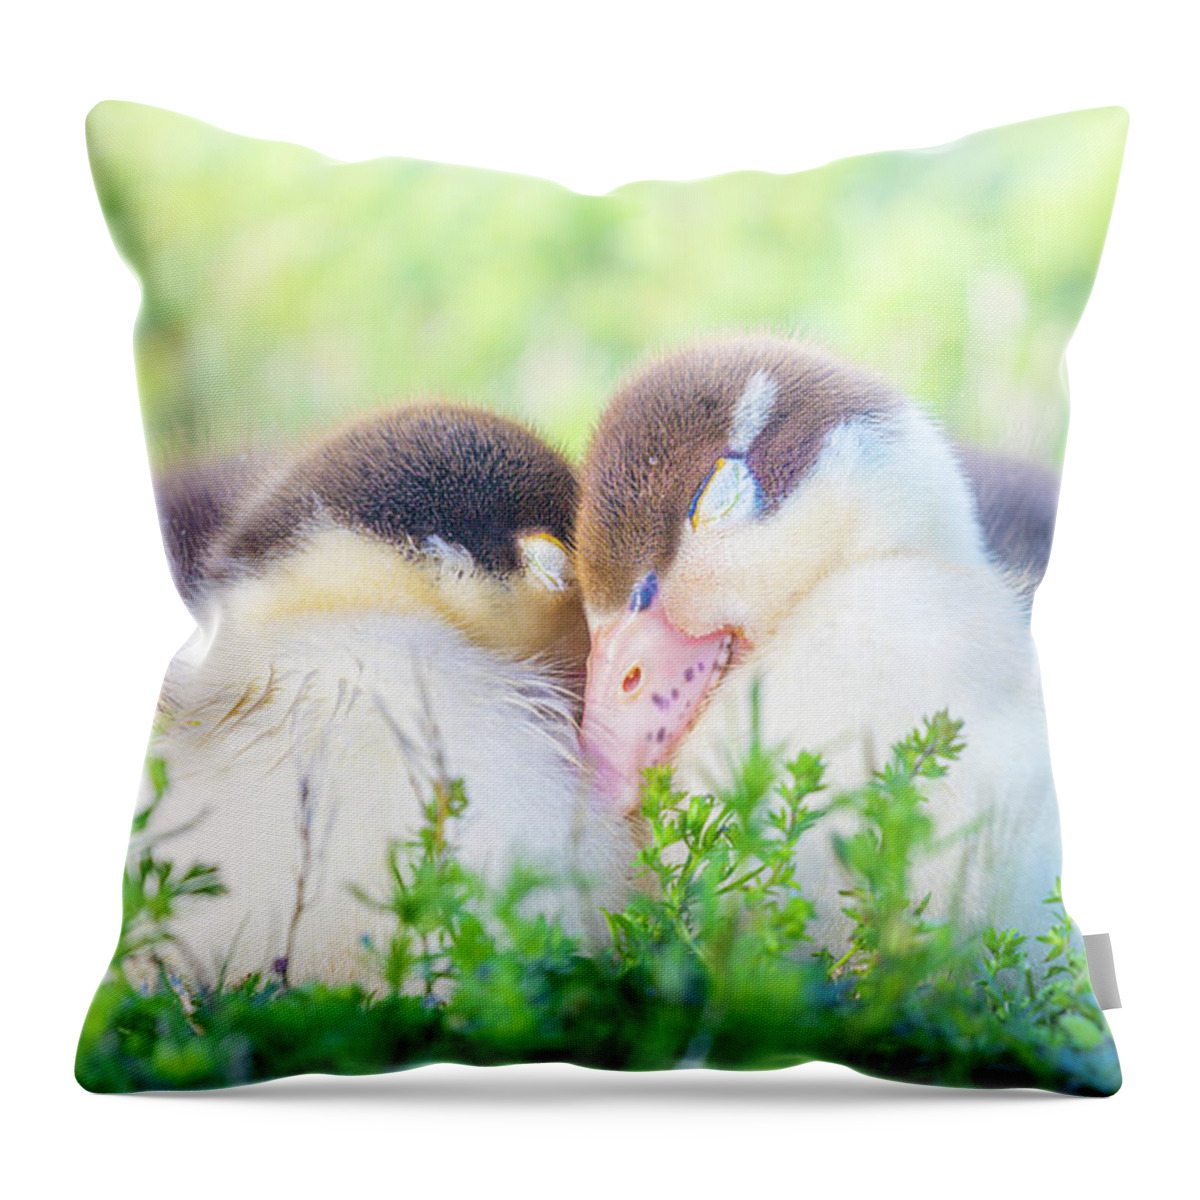 Napping Throw Pillow featuring the photograph Snuggling Ducklings by Jordan Hill